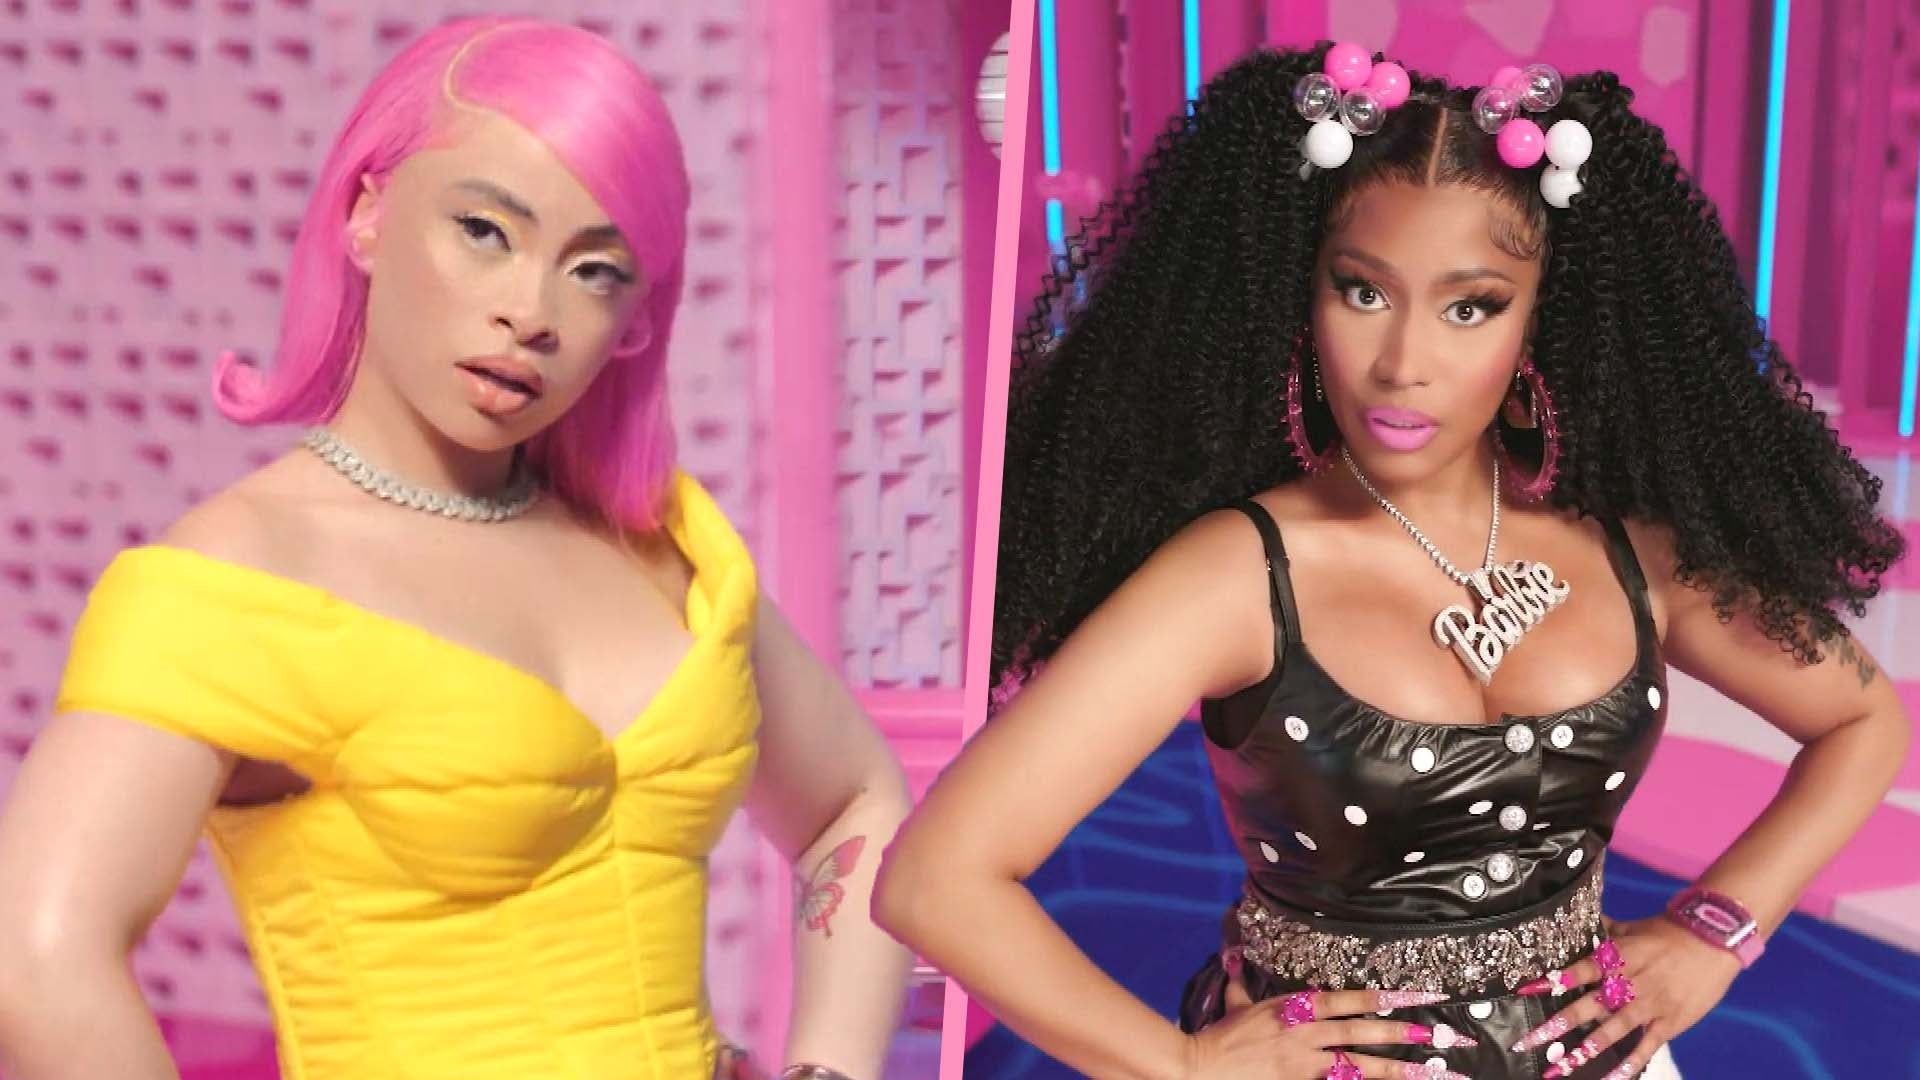 Nicki Minaj and Ice Spice Are Dolls Brought to Life in 'Barbie World